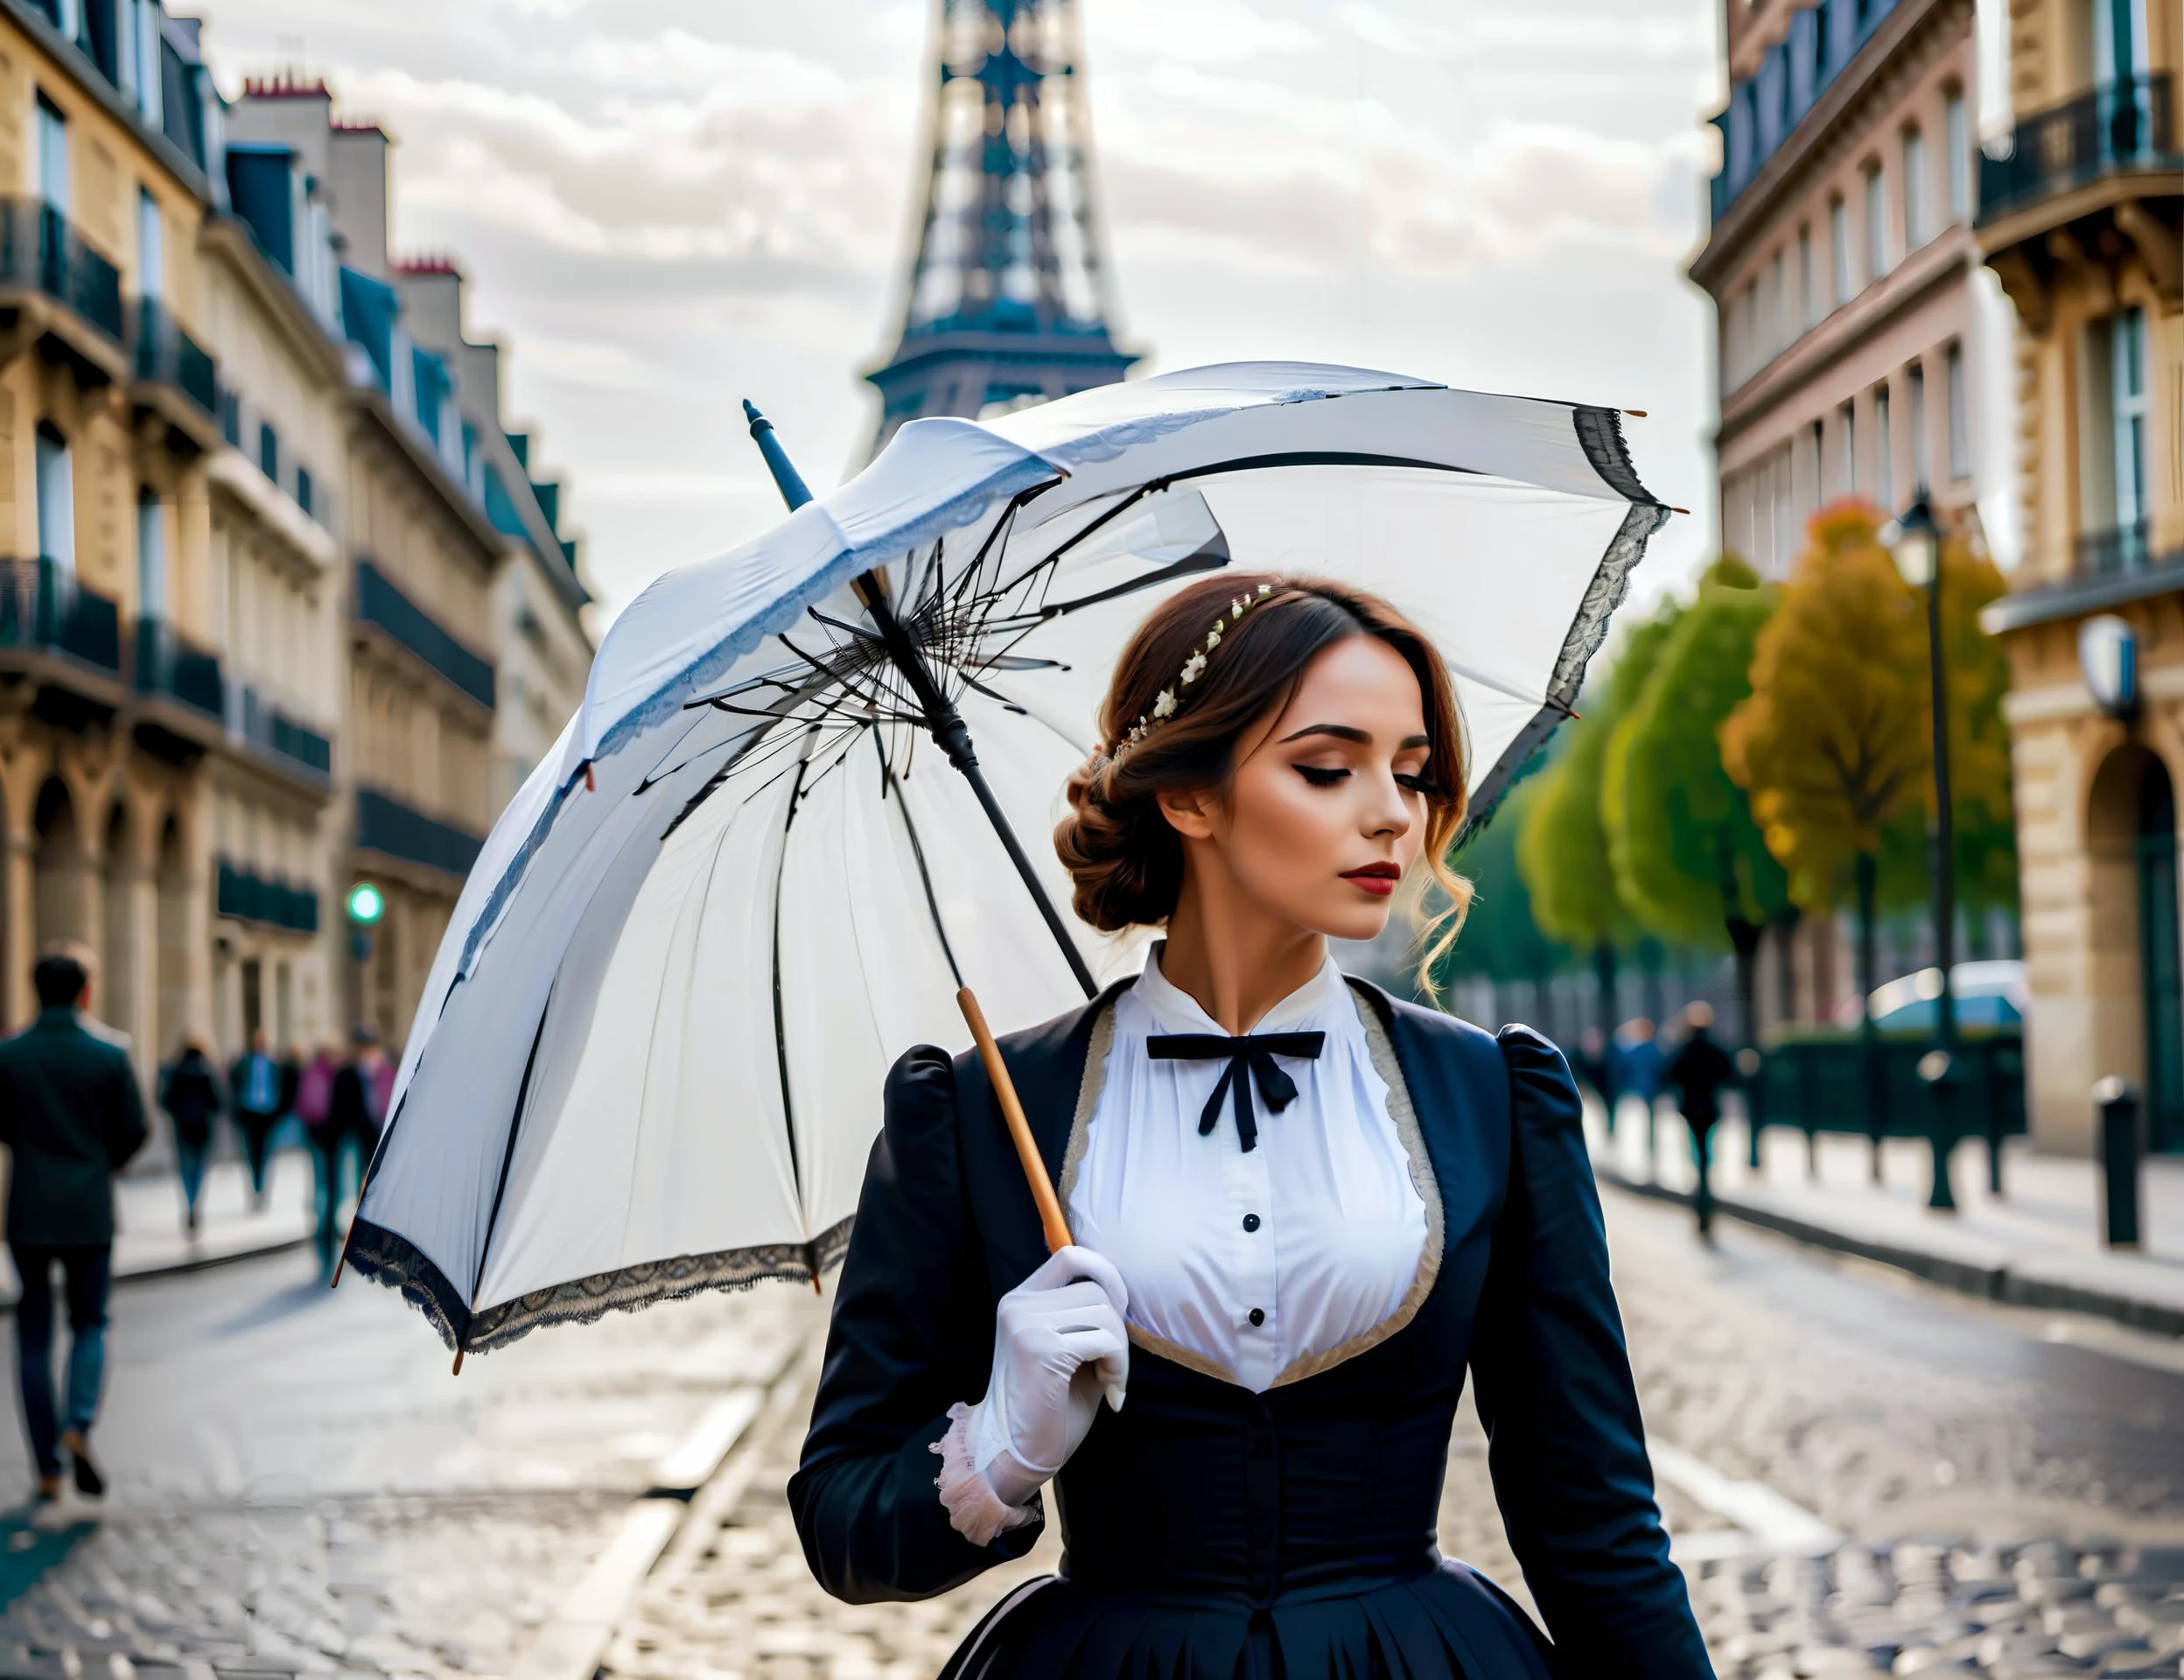 Victorian time,  Paris France, A Parisian women wearing a traditional dress, white umbrella, fashionable, young, walking on the cobblestone street, day time, Eiffel tower, photo, HD, masterpiece, best quality, high quality,   Movie Still, Film Still, Cinematic, Cinematic Shot, Cinematic Lighting ,  attractive,